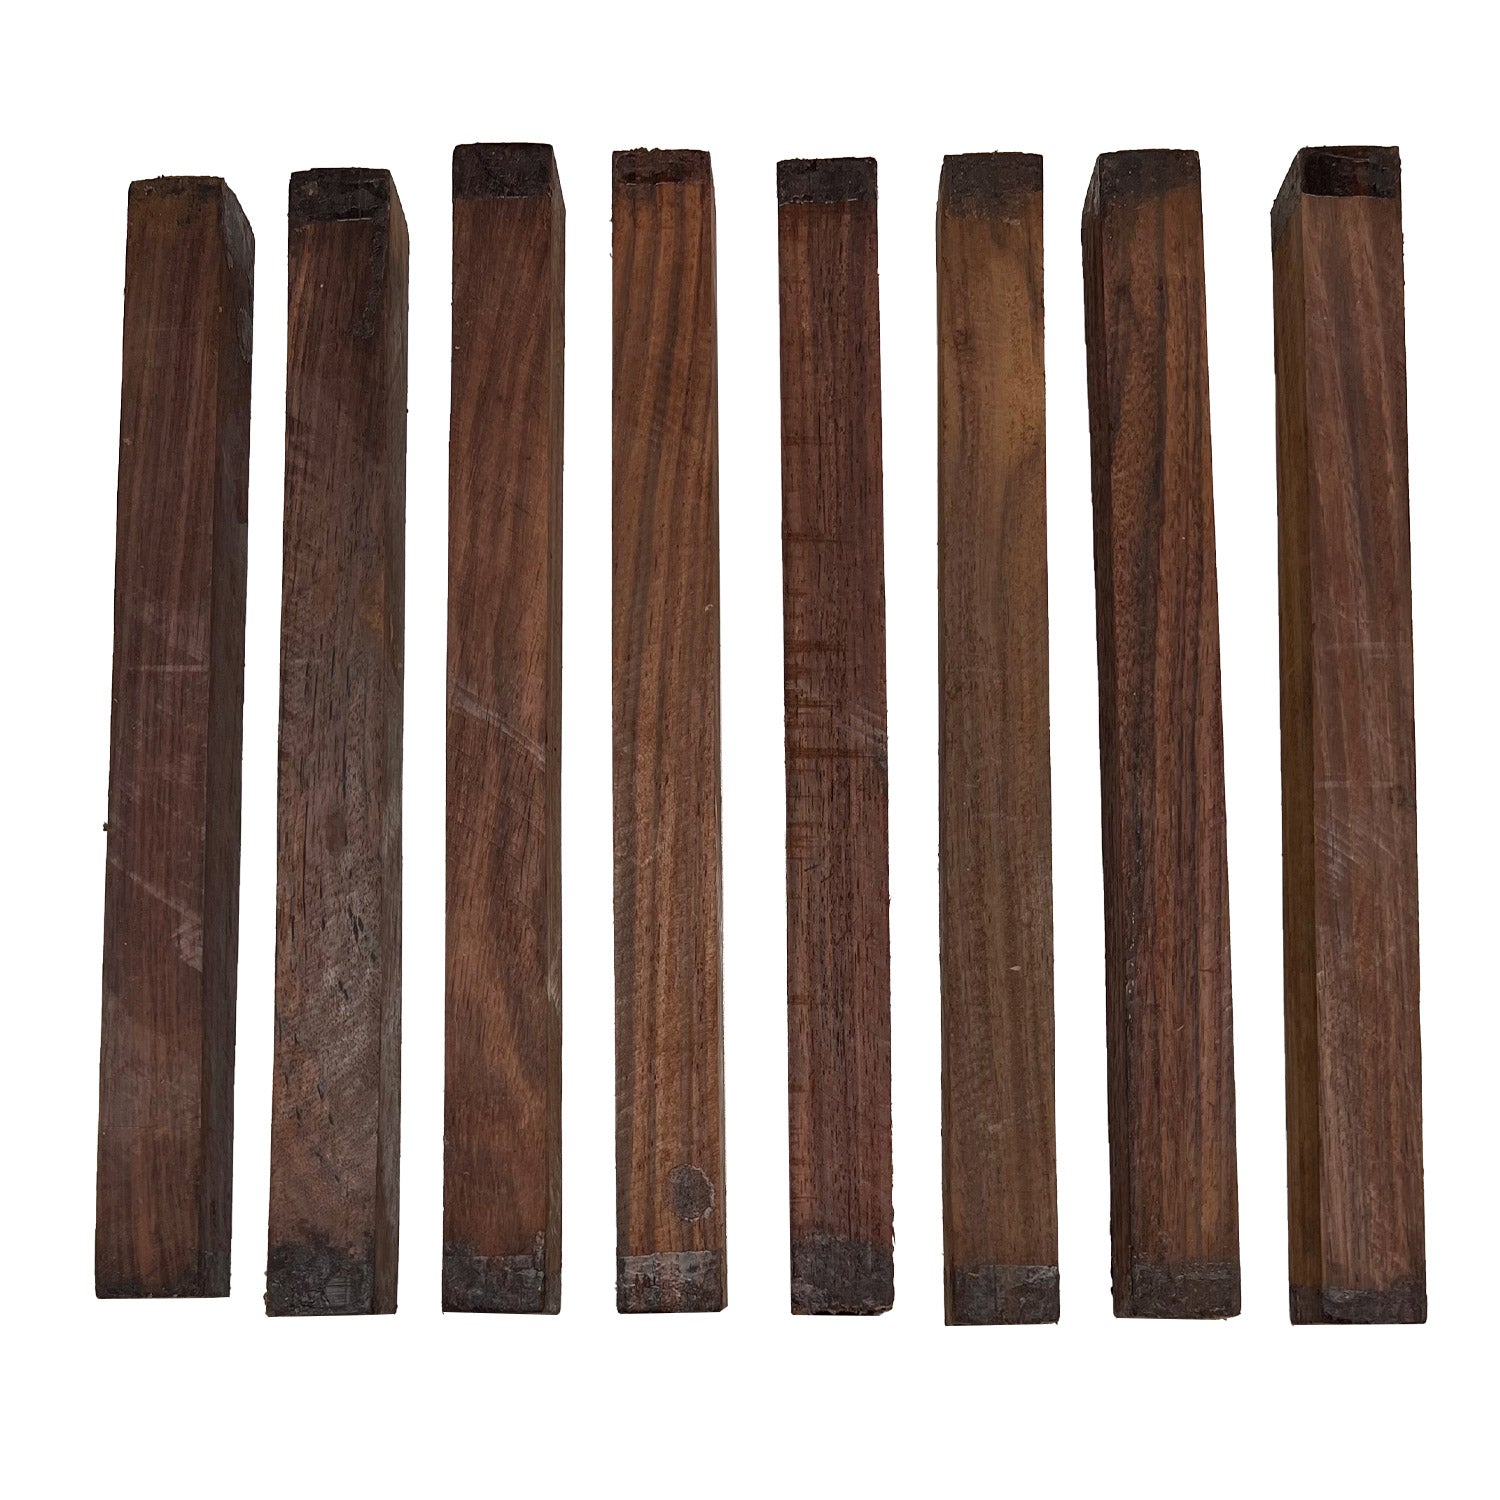 Pack of 8, Indian Rosewood Turning Blanks/Hobbywood Blanks 1” x 1” x 12” - Exotic Wood Zone - Buy online Across USA 